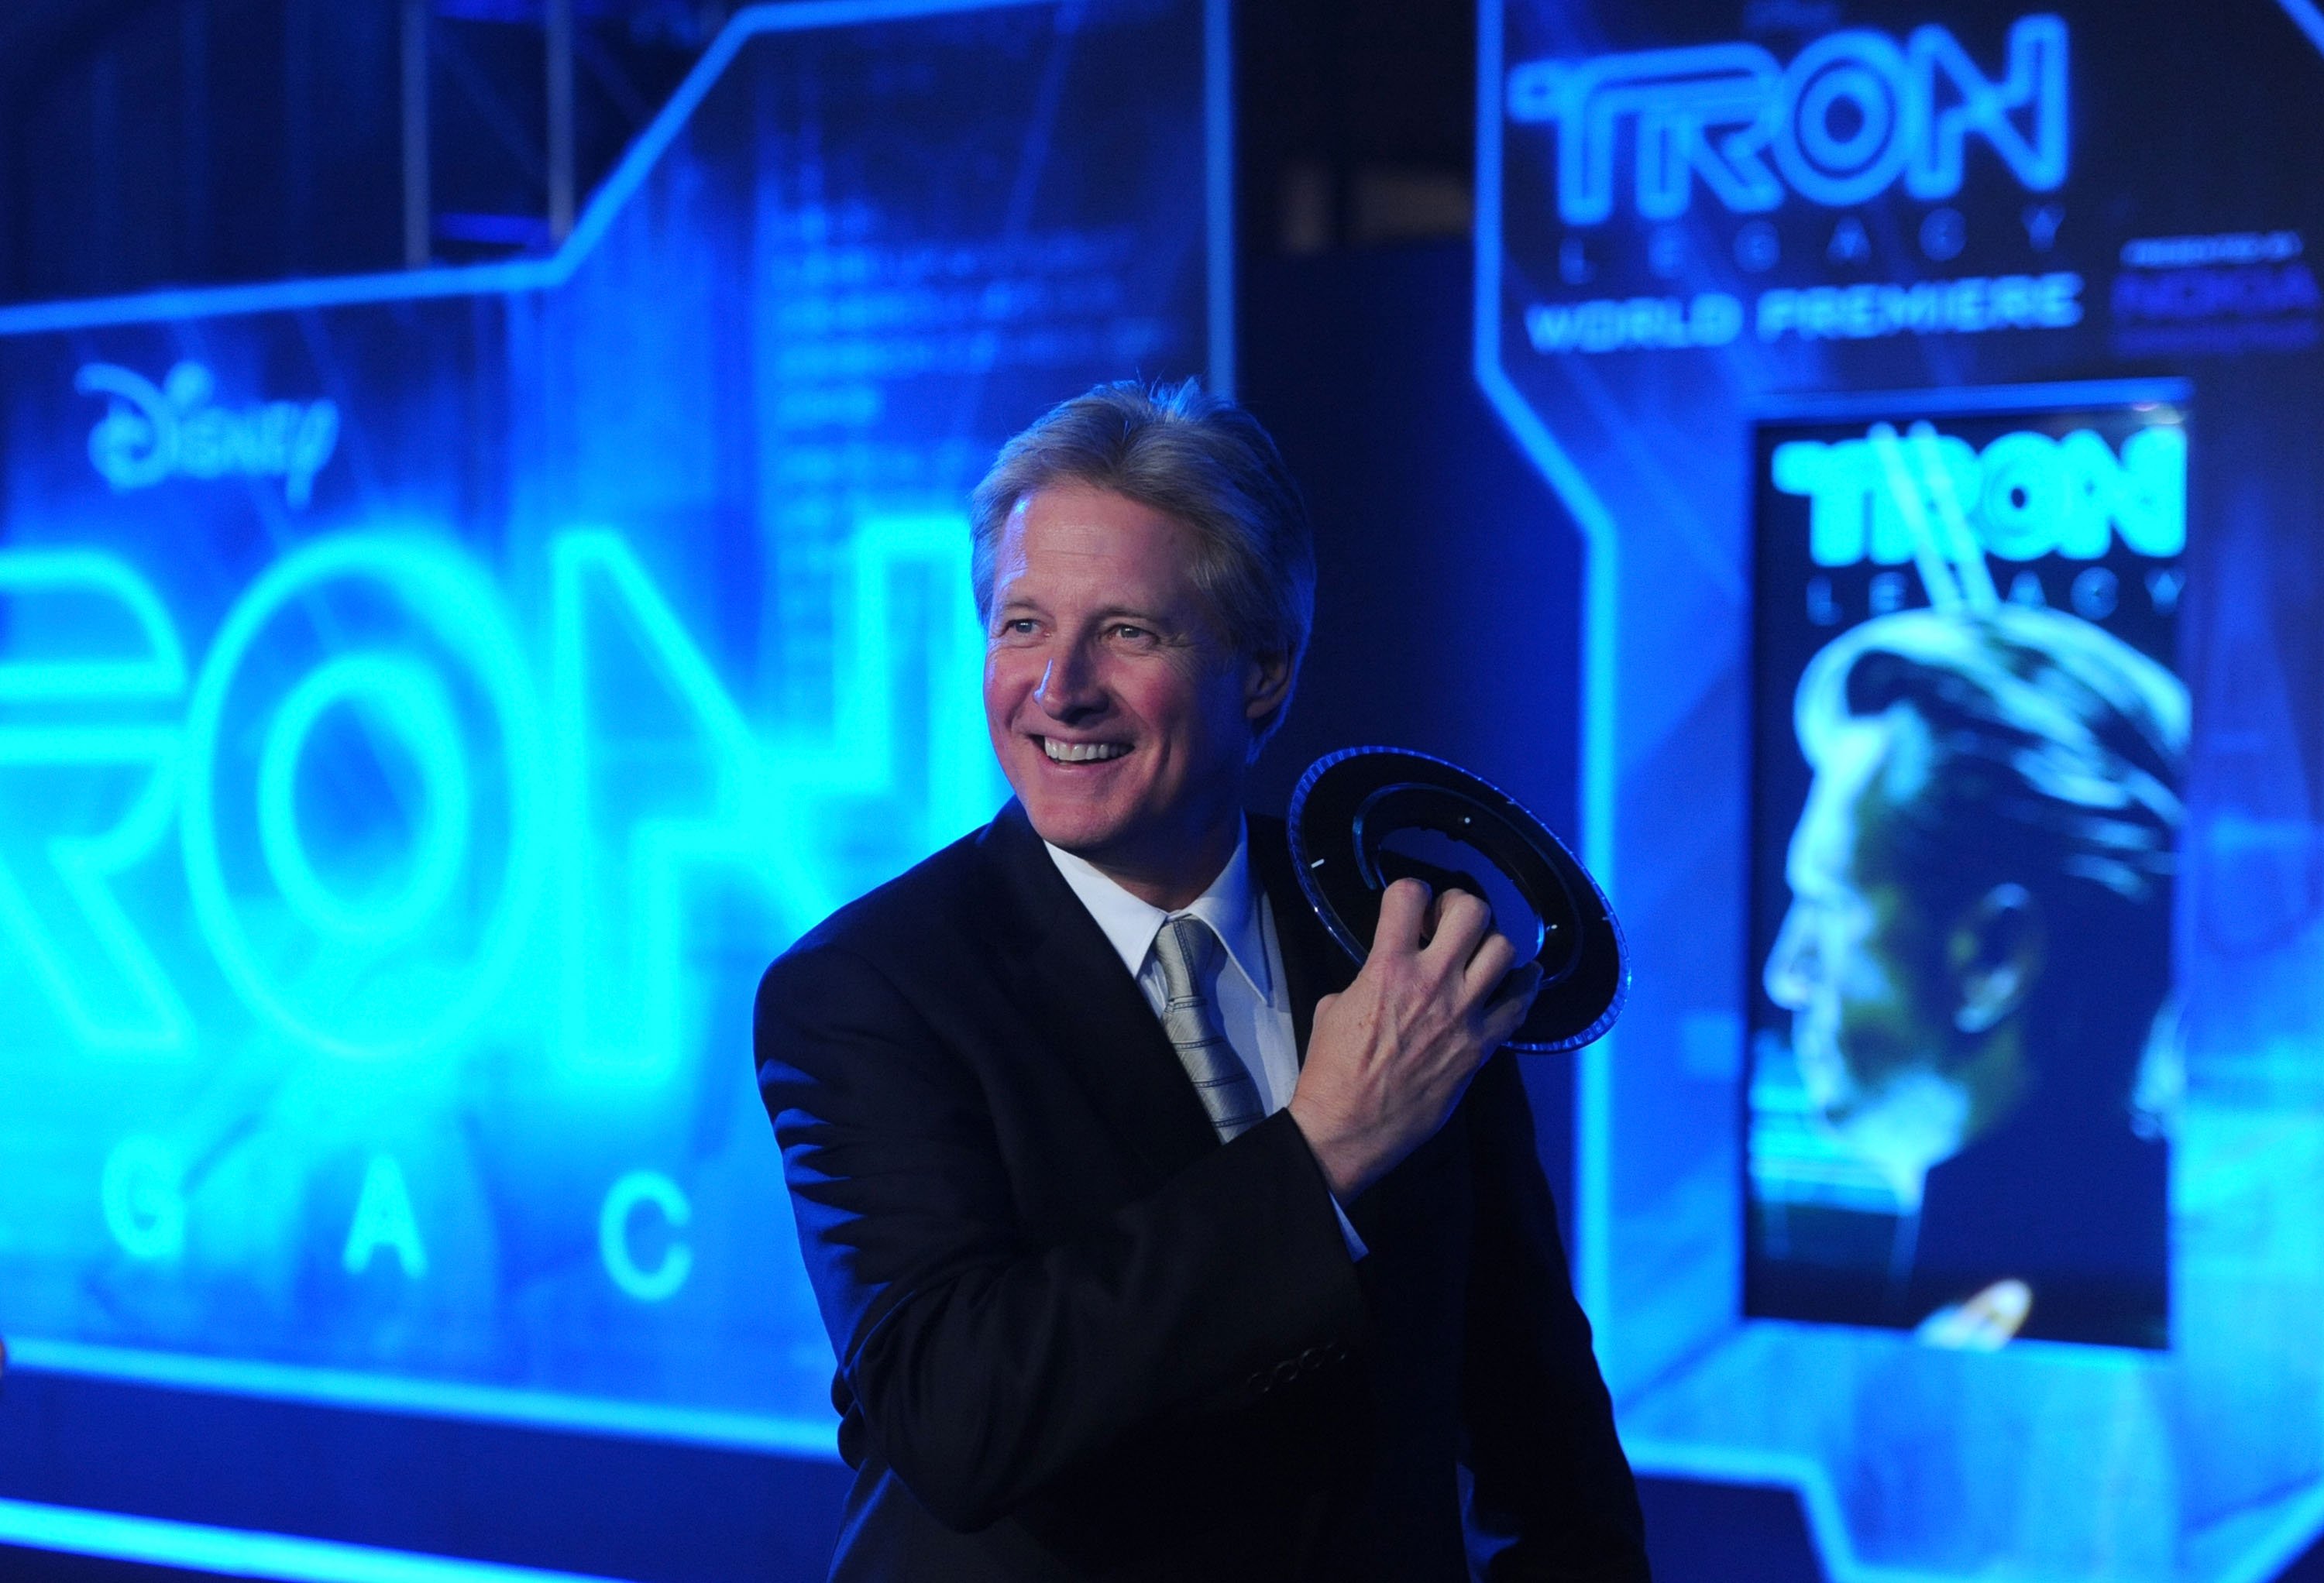 Bruce Boxleitner smiling in a black suit while attending the 'Tron' premiere.